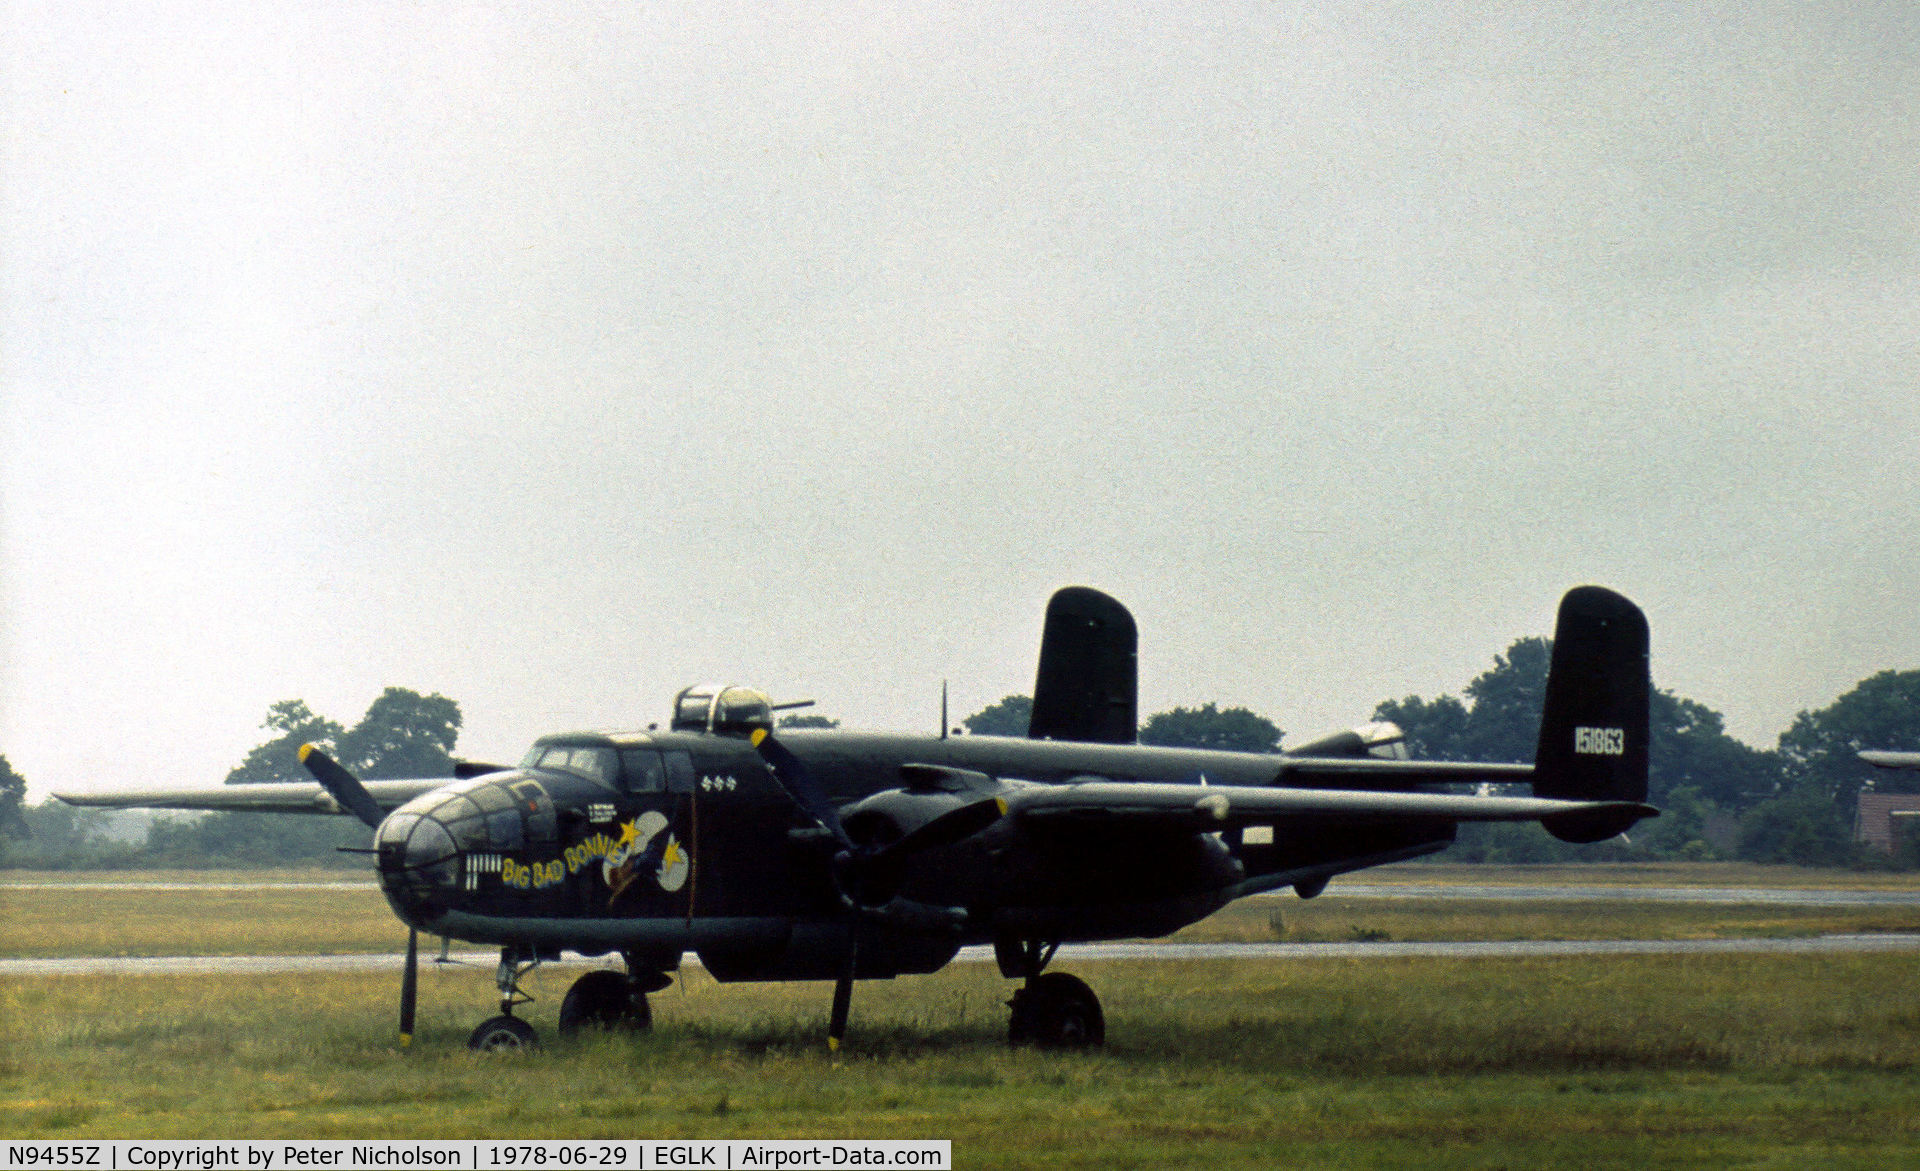 N9455Z, 1944 North American TB-25N Mitchell C/N 108-34535 (44-30210), TB-25N Mitchell seen at Blackbushe in the Summer of 1978 after use in the film Hannover Street.